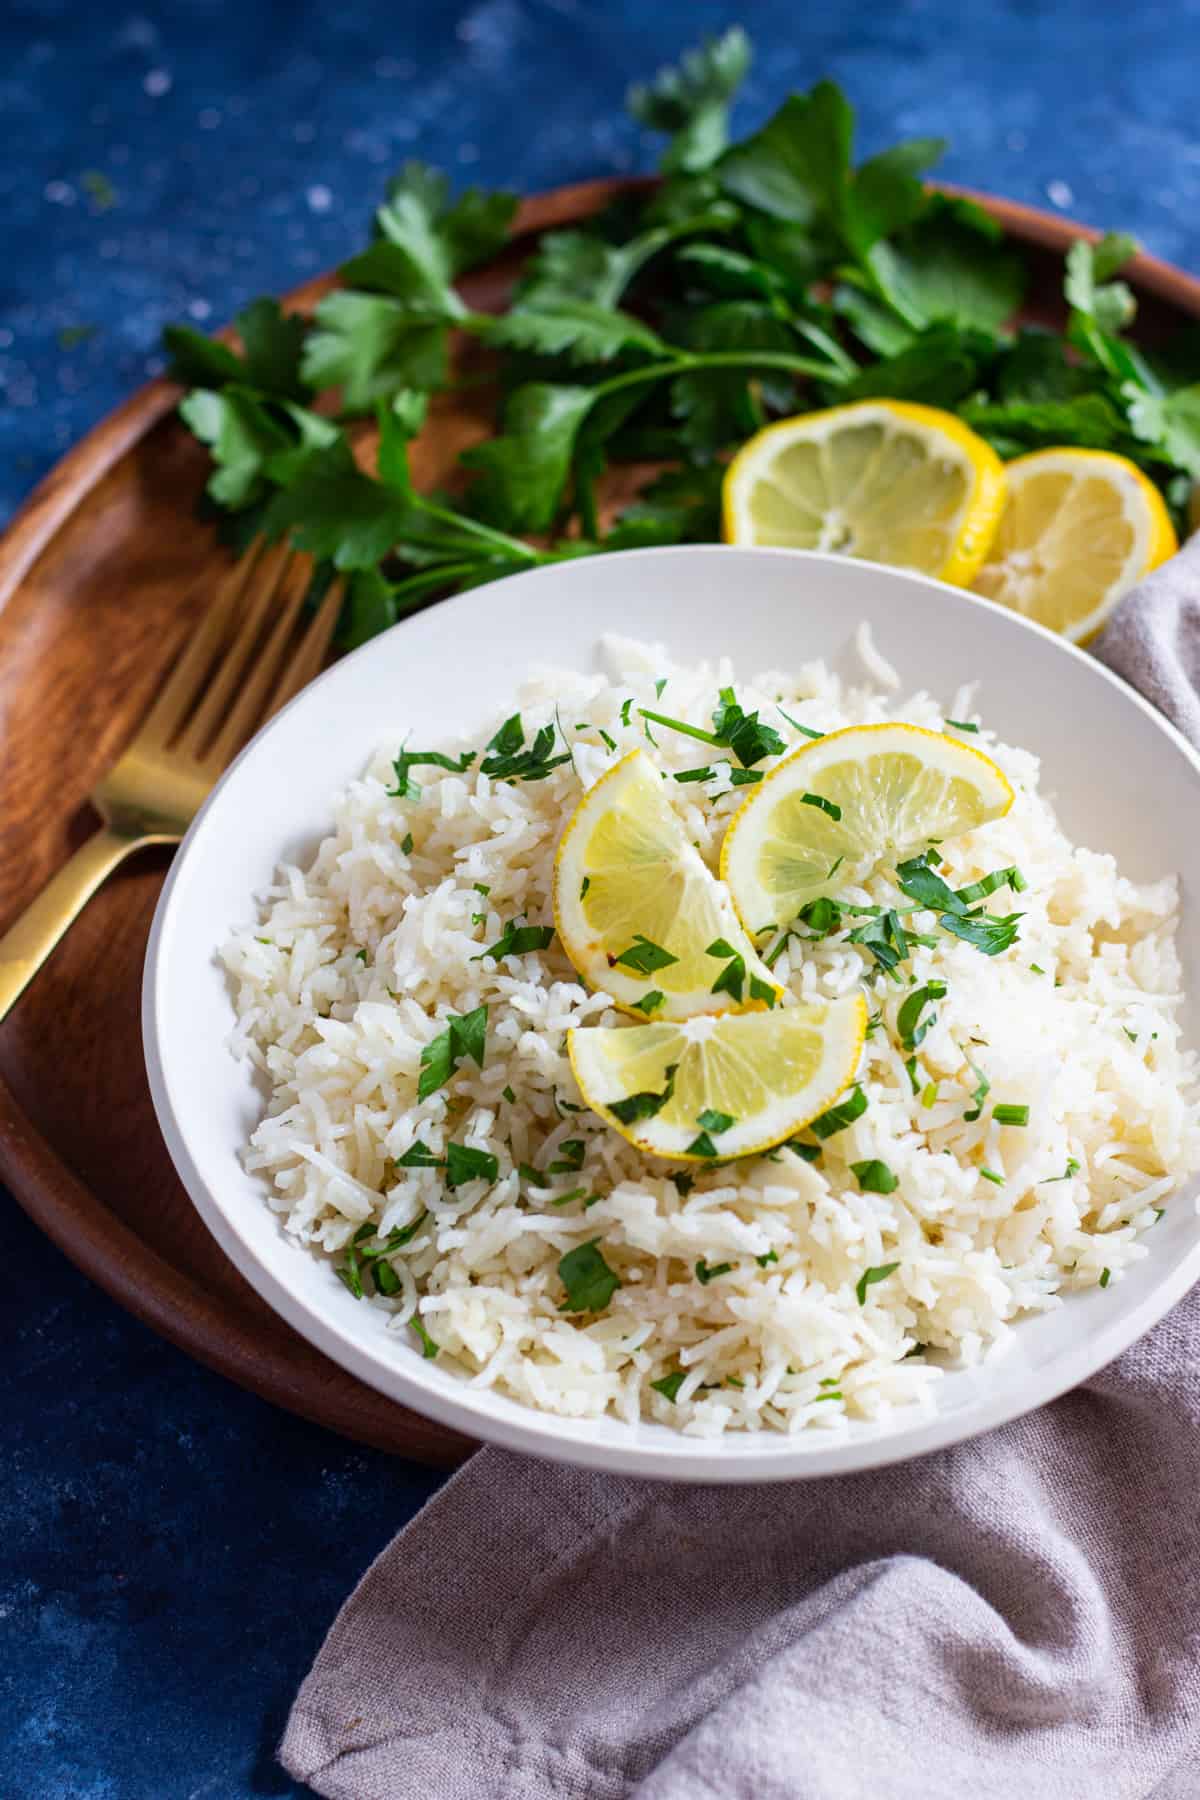 This Greek lemon rice is ready in 30 minutes. The lemon and garlic add a lot of flavor to this Greek-inspired dish, which can be served on the side or as the main meal!
